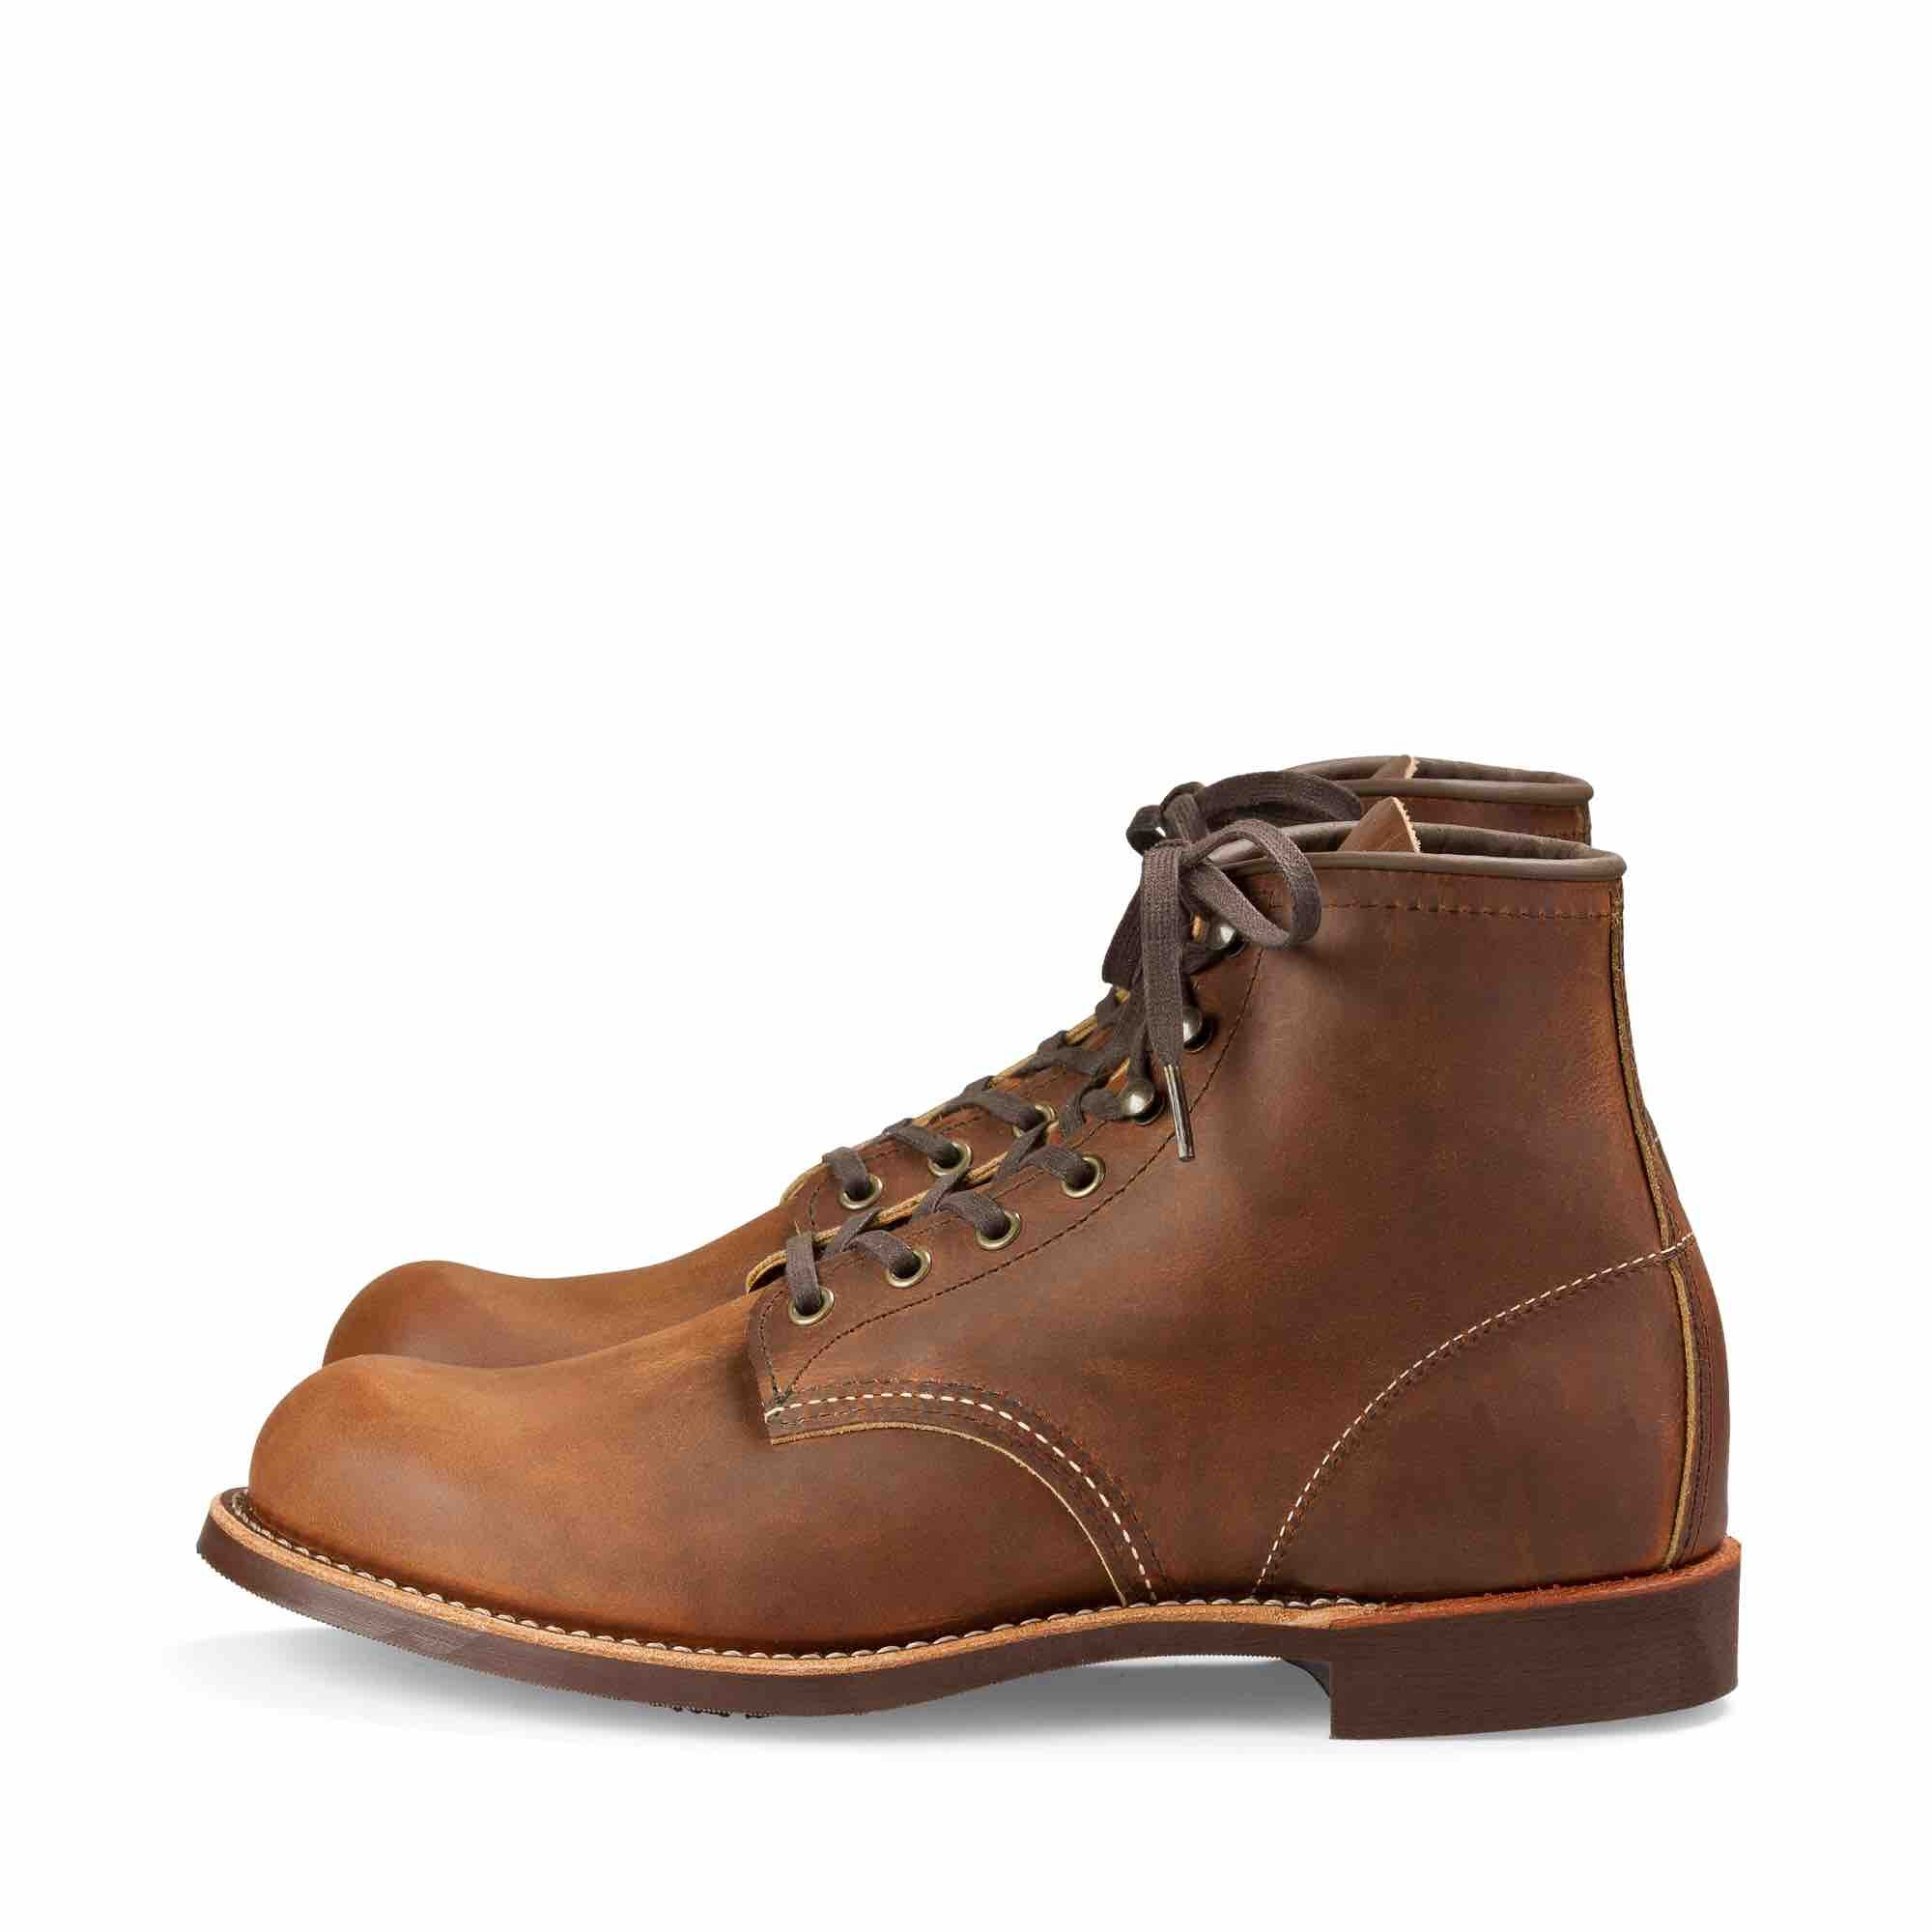 Red Wing - 3343 - Blacksmith (Copper Rough & Tough) - Brund